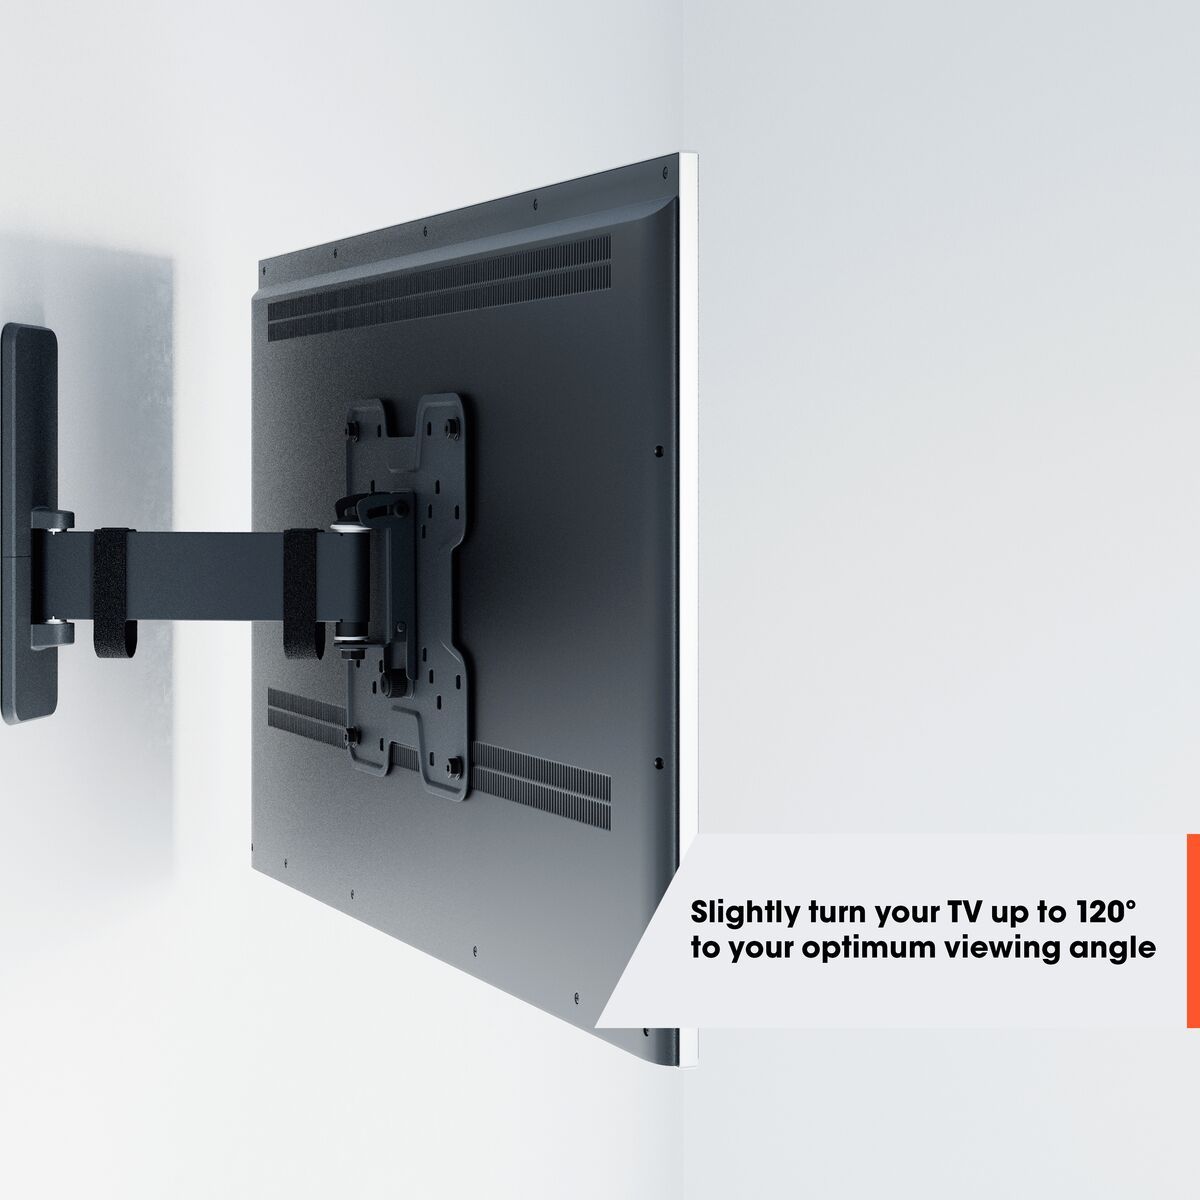 Vogel's TVM 1423 Full-Motion TV Wall Mount - Suitable for 32 up to 65 inch TVs - Motion (up to 120°) swivel - Tilt up to 15° - USP